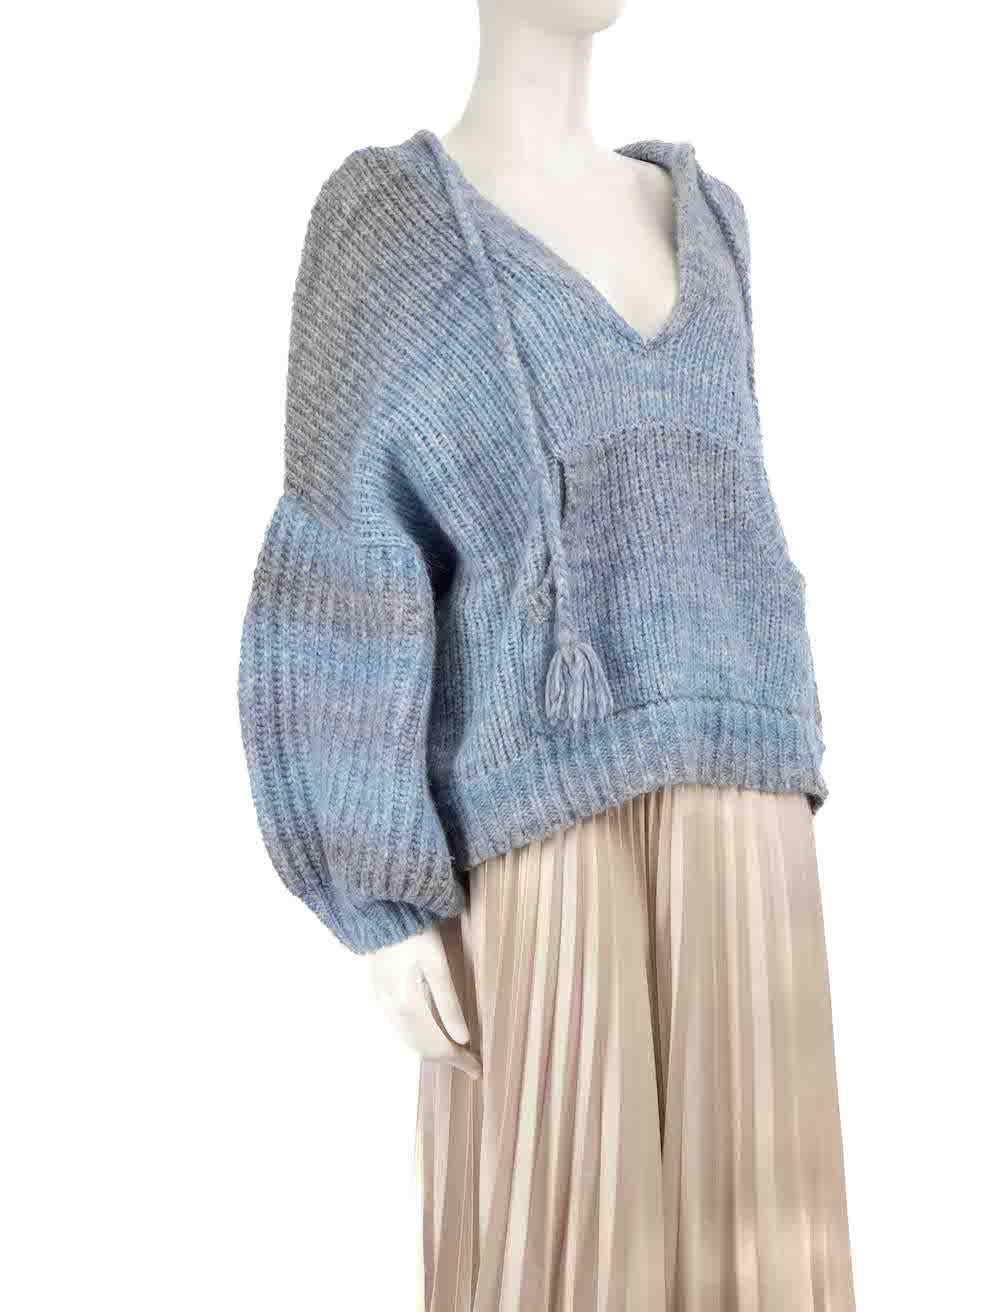 CONDITION is Very good. Hardly any visible wear to knitted hoodie is evident on this used LoveShackFancy designer resale item.
 
 Details
 Blue
 Wool
 Knit jumper
 Hooded
 V-neck
 Long sleeves
 Tassel detail
 
 
 Made in China
 
 Composition
 23%